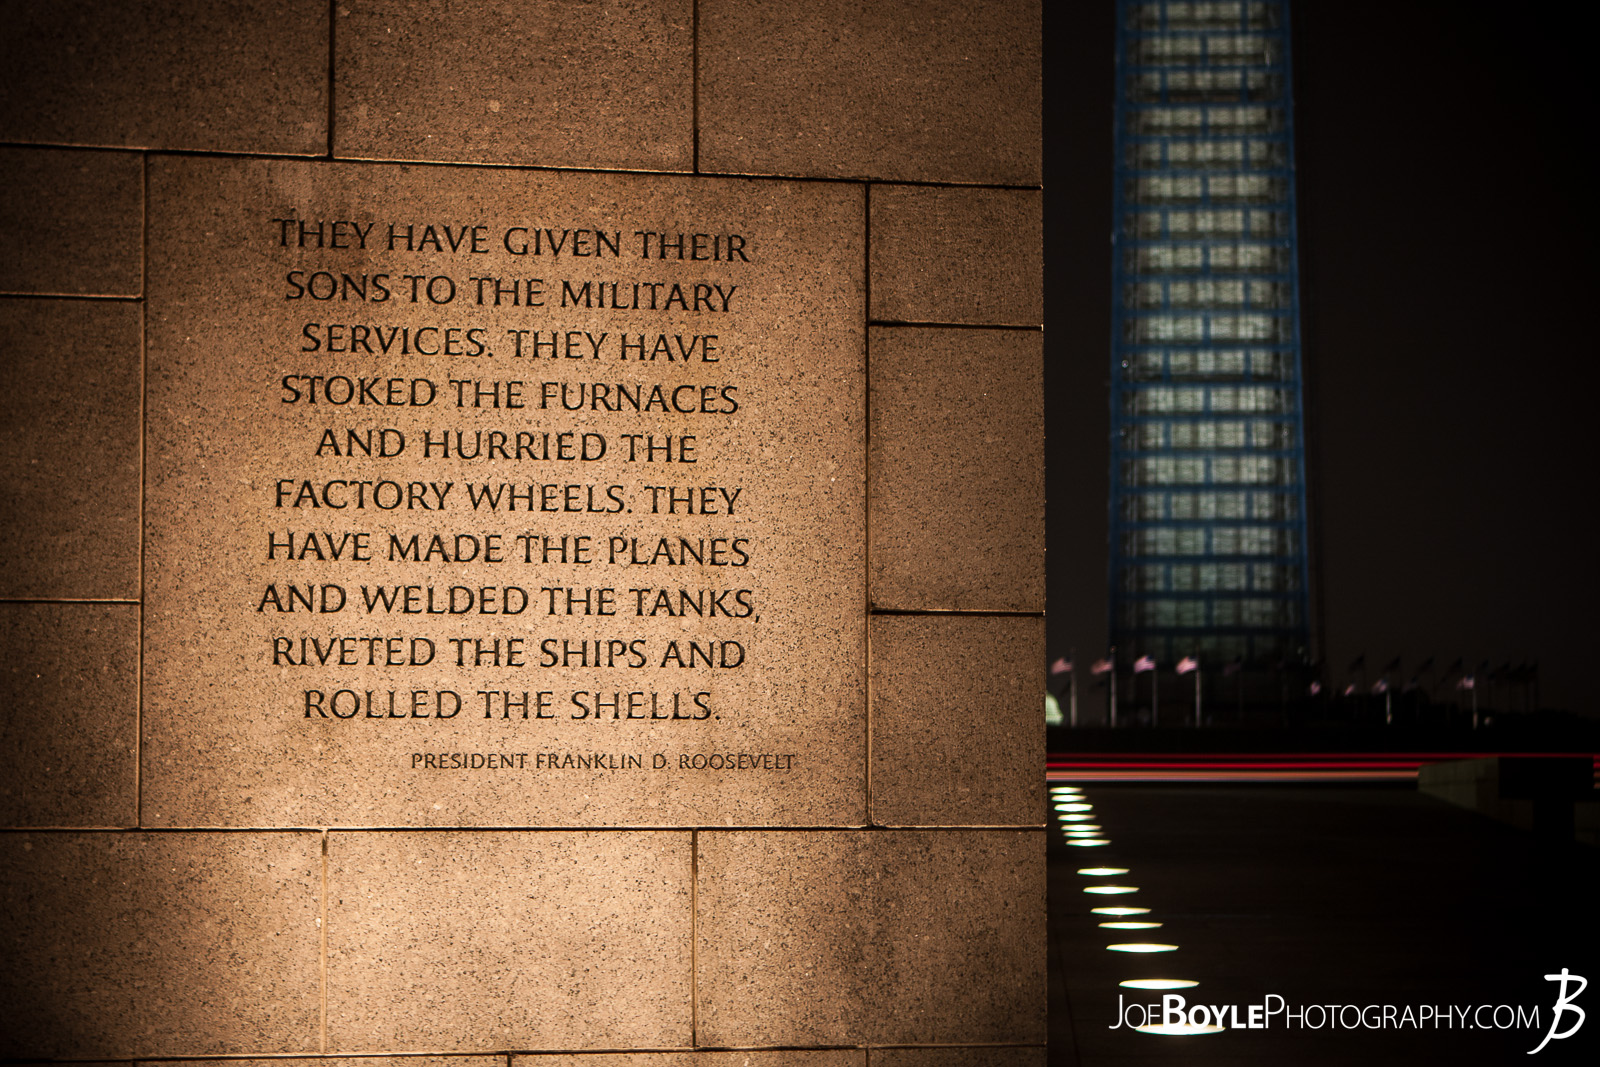  While I was in Washington, DC I was able to take some great night images of a few of the iconic landmarks that make up this city such as this image: The World War II Memorial with this quote by by Franklin D. Roosevelt, "They have given their sons to the Military Services. They have stoked the furnaces and hurried the factory wheels. They have made the planes and welded the tanks, riveted the ships and rolled the shells." 